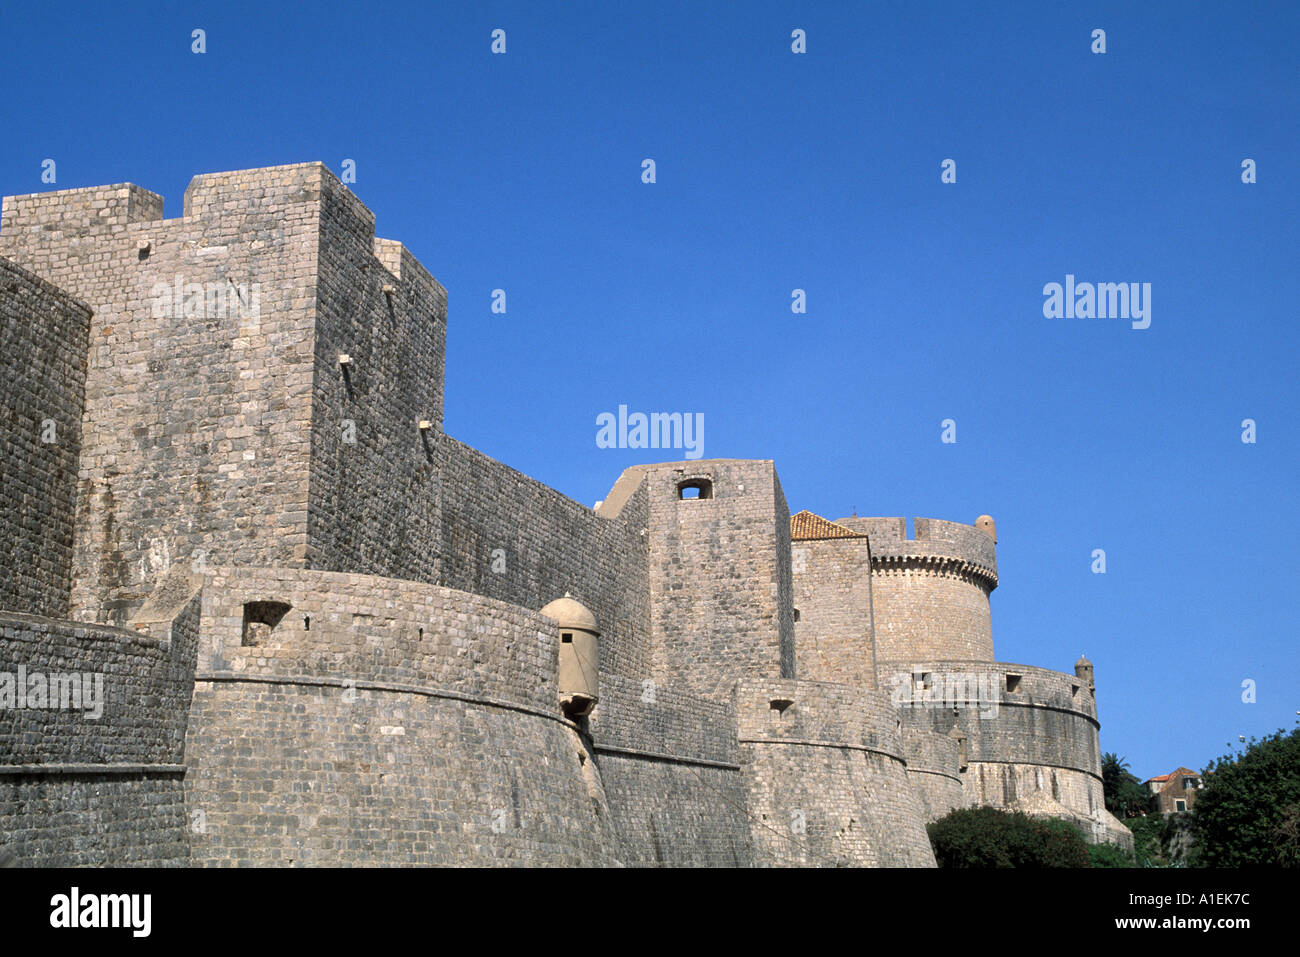 Dubrovnik Croatia Castle Old Town medieval Walled City Stock Photo